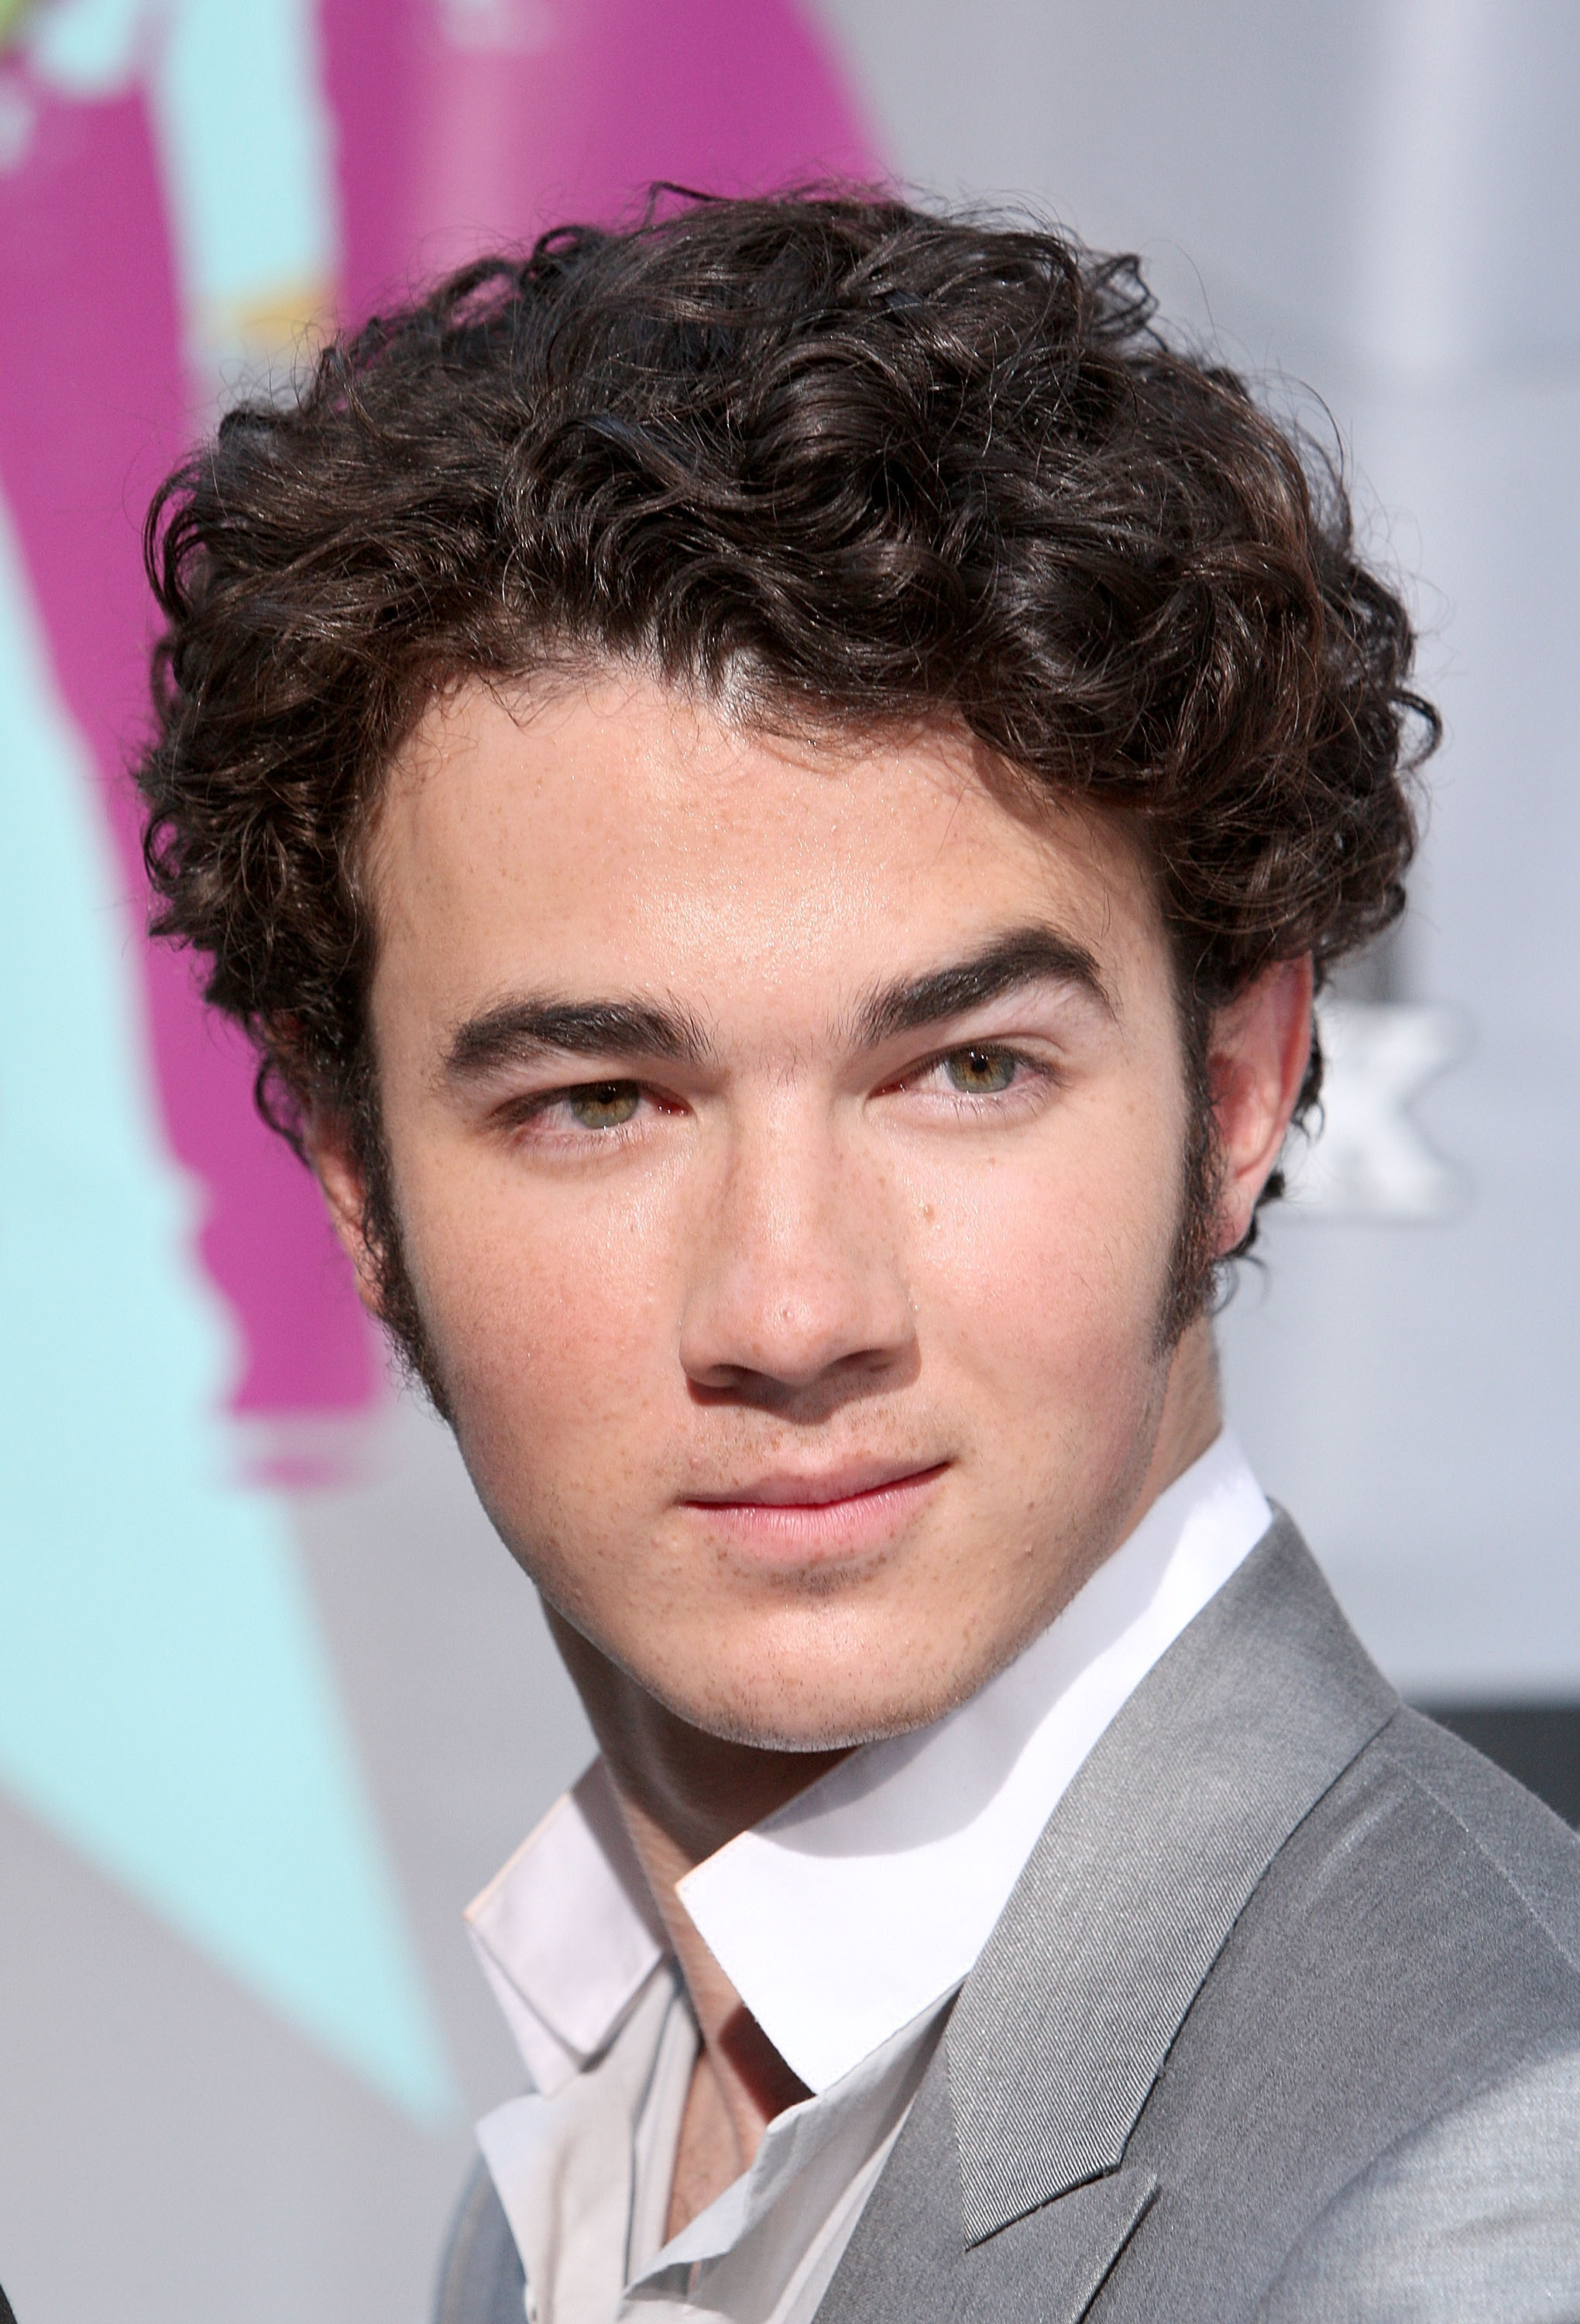 Kevin Jonas on the red carpet